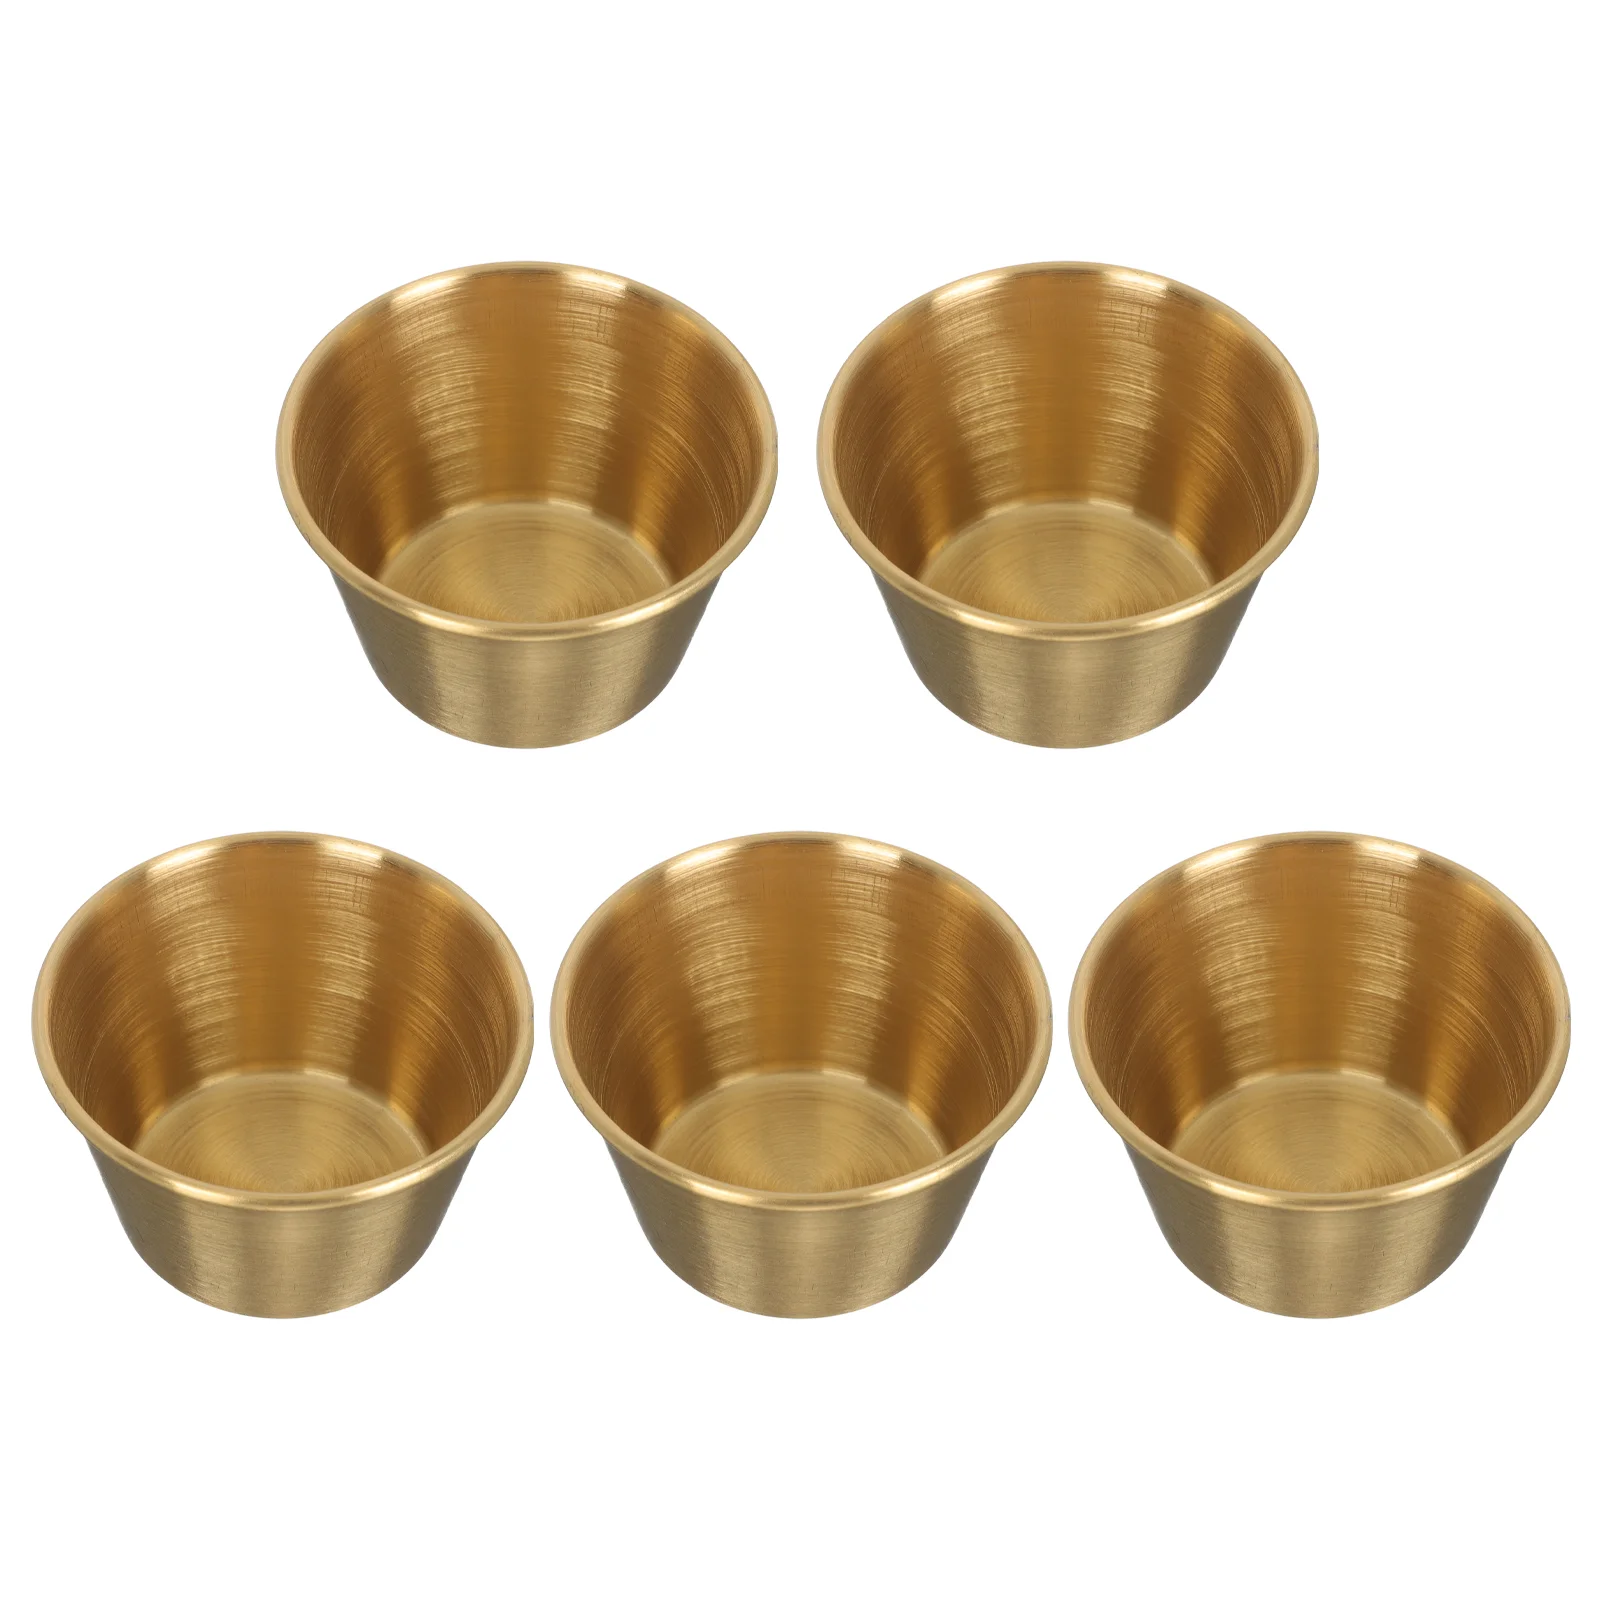 

Sauce Dish Cups Dipping Cup Dishes Bowl Condiment Bowls Vinegar Mini Appetizer Seasoning Soy Wasabi Plates Stainless Steel